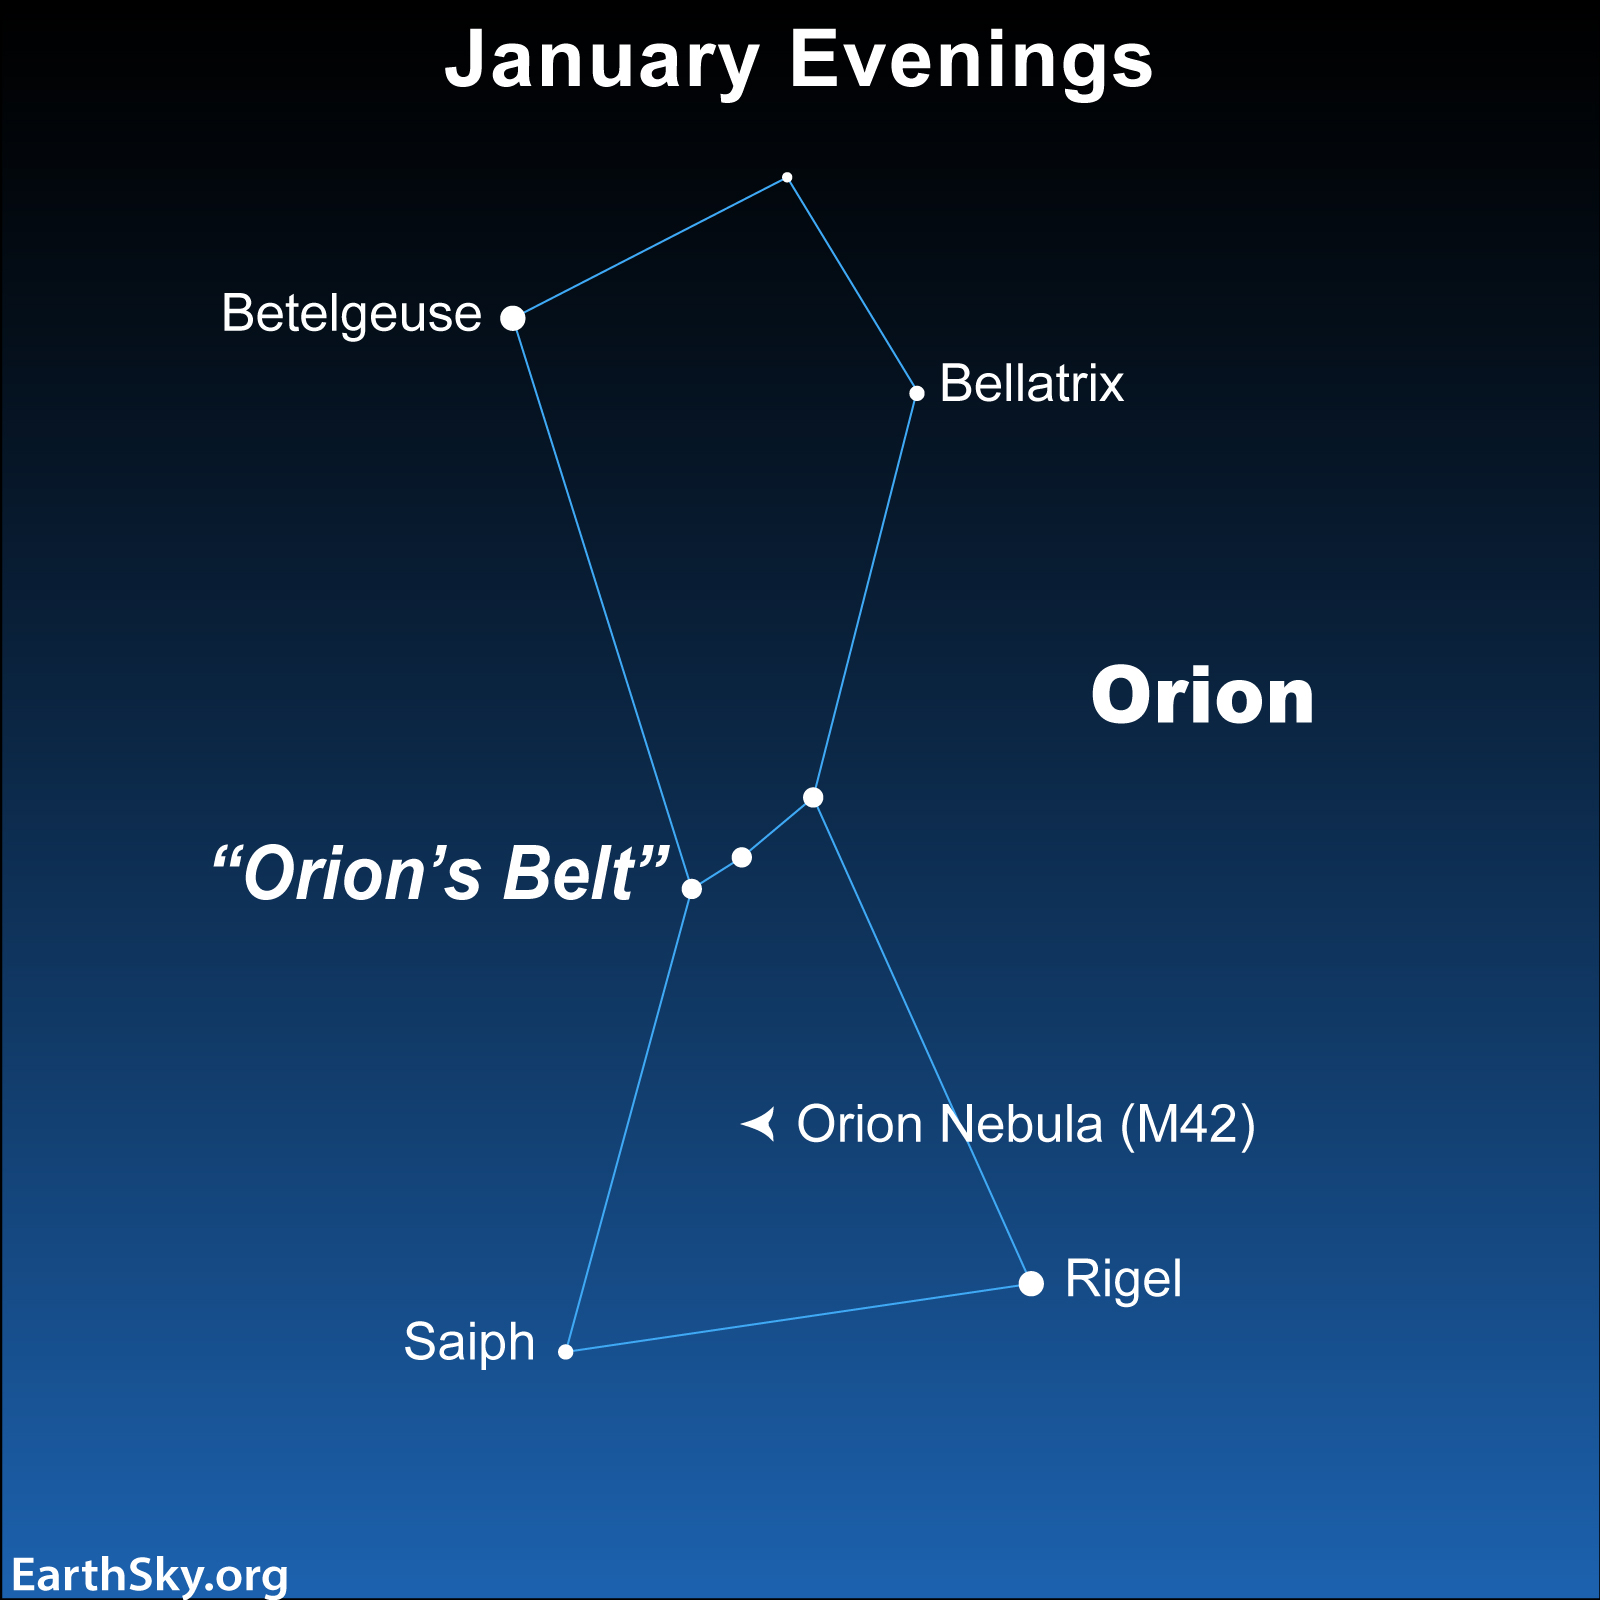 Rigel, Star chart with labeled white dots for stars and light blue lines tracing the constellation Orion.